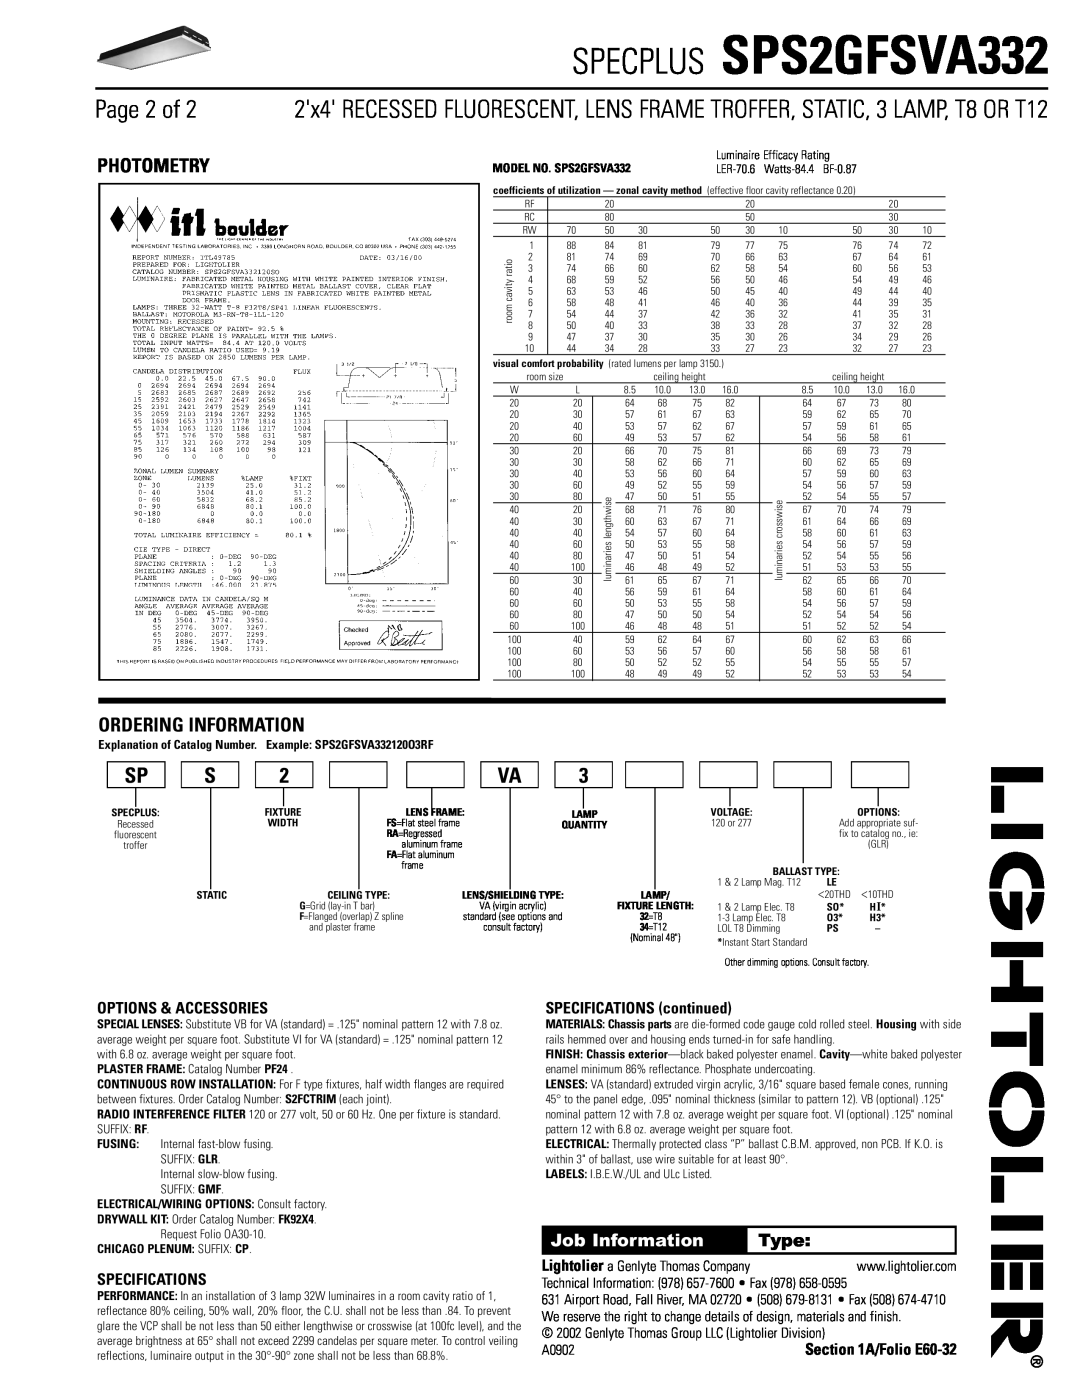 Lightolier Page 2 of, Photometry, Ordering Information, SPECPLUS SPS2GFSVA332, Job Information, Type, Specifications 